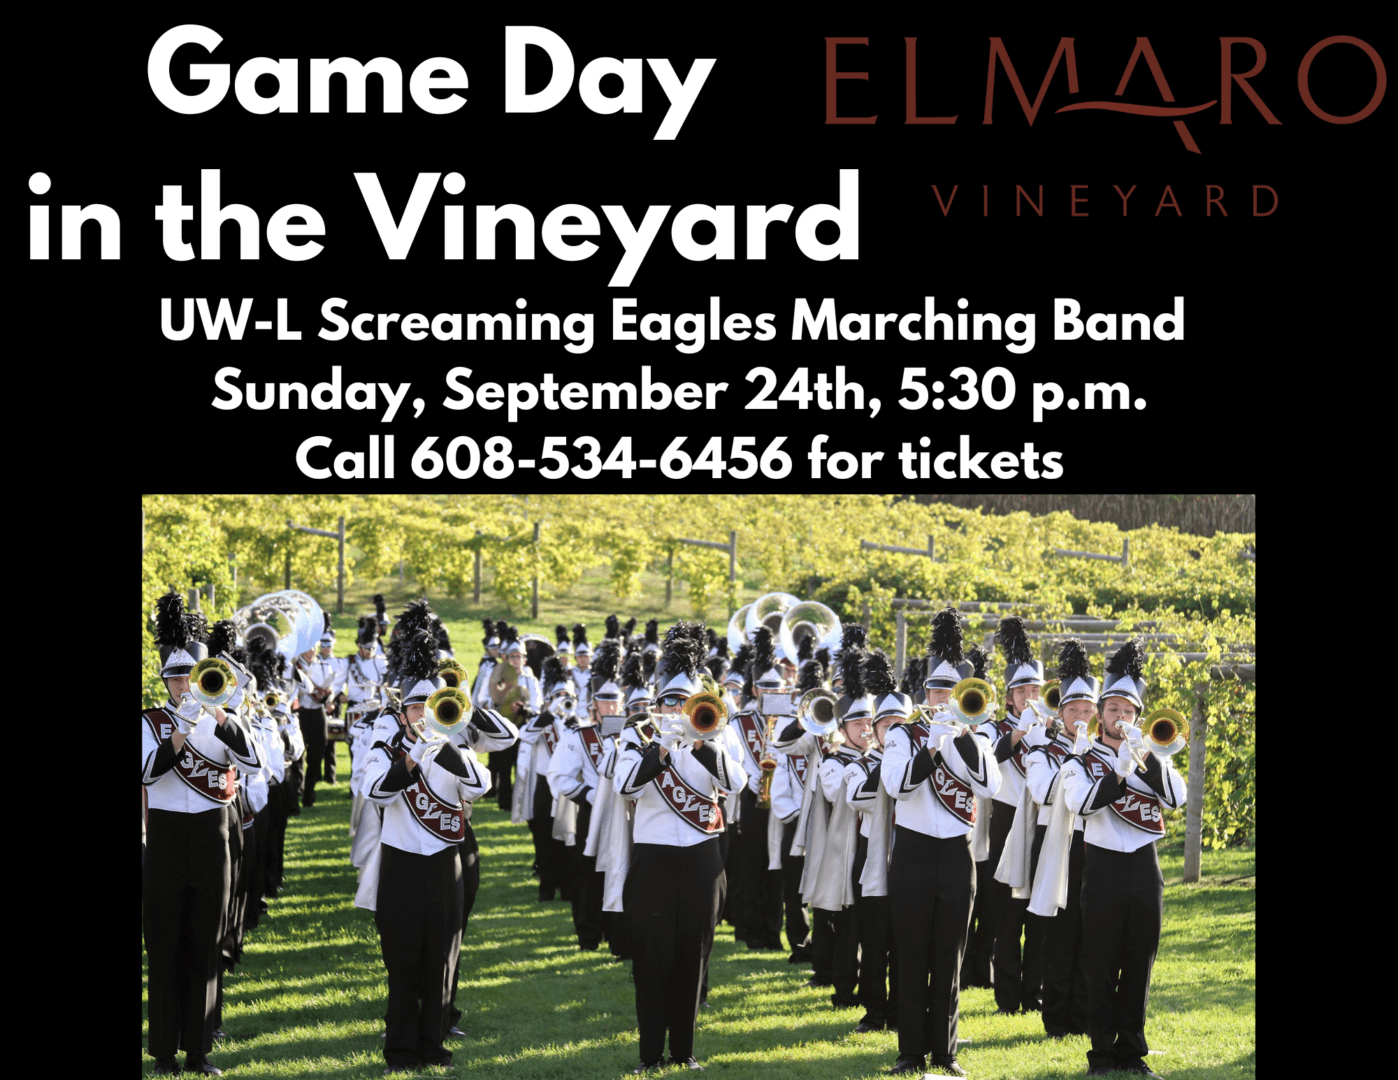 UW-L Screaming Eagles Marching Band Sunday, September 24th, 530 p.m. Call 608-534-6456 for tickets